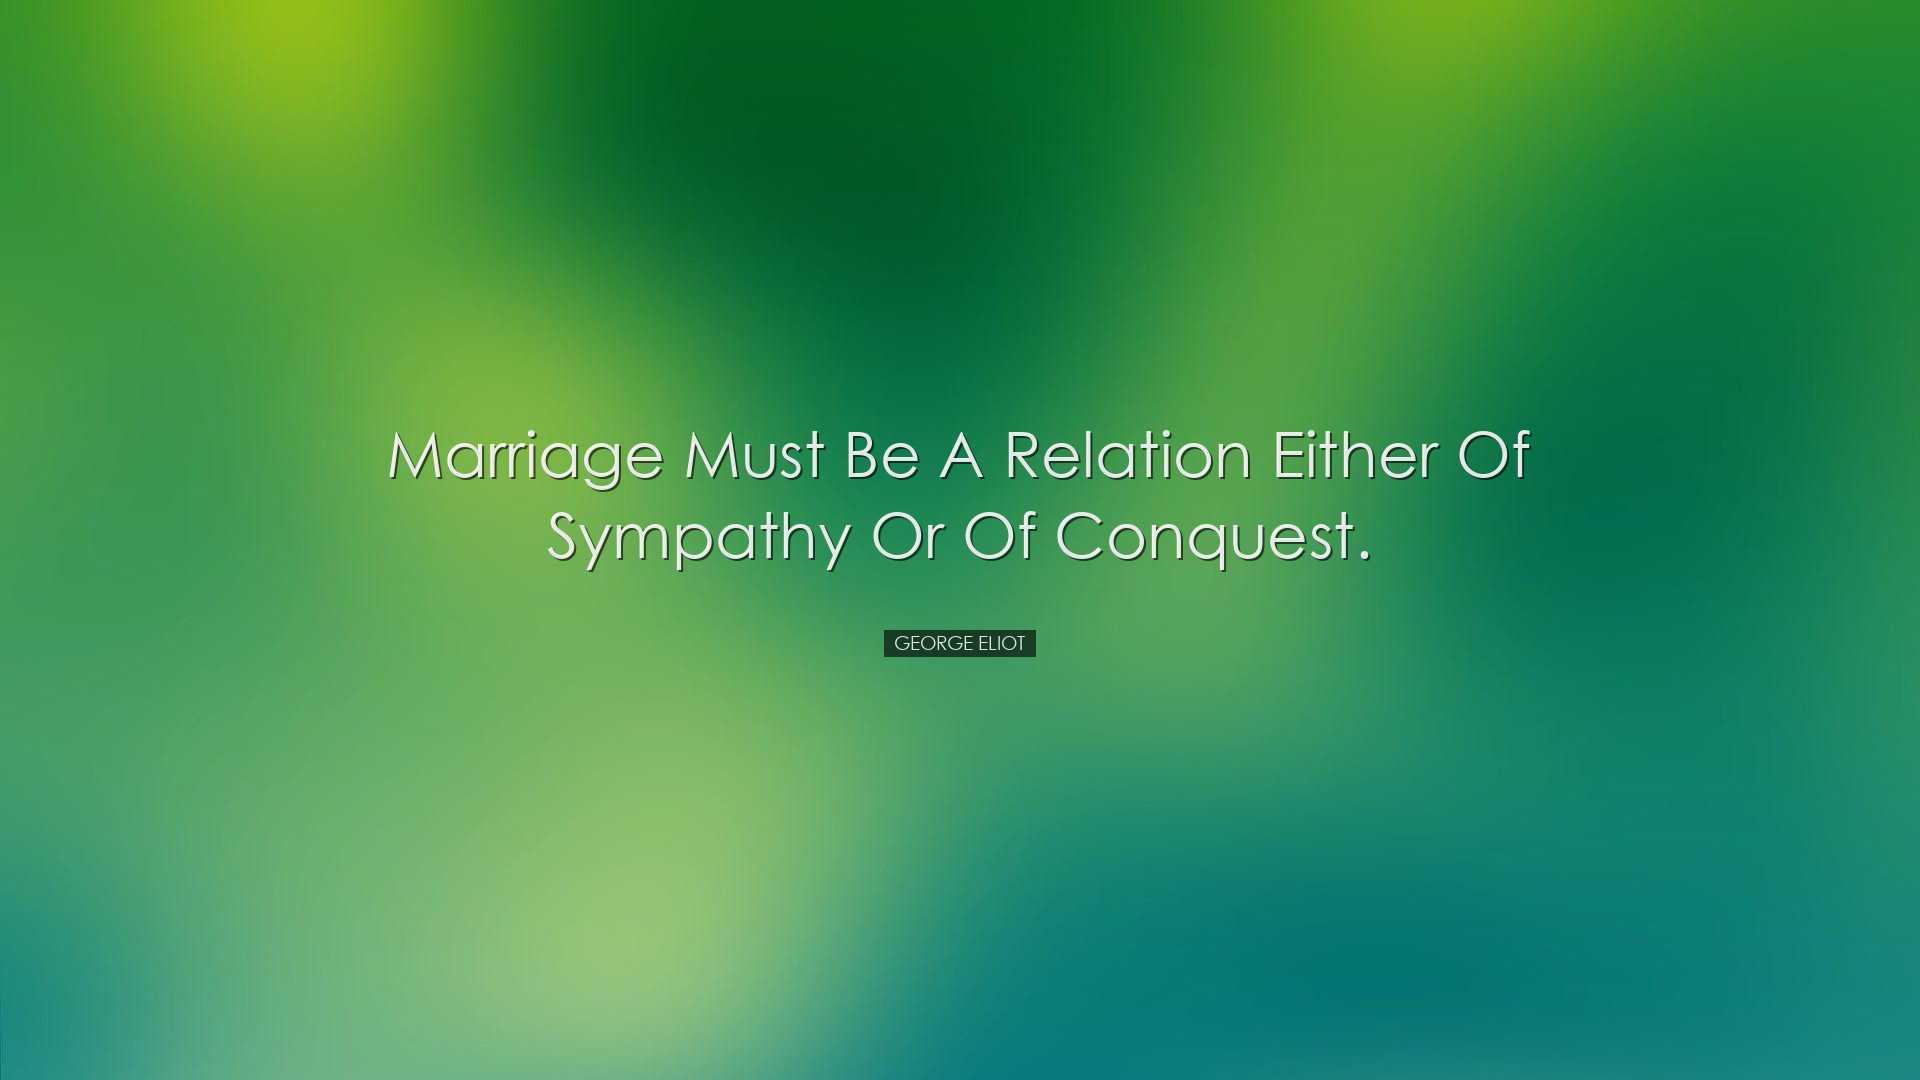 Marriage must be a relation either of sympathy or of conquest. - G